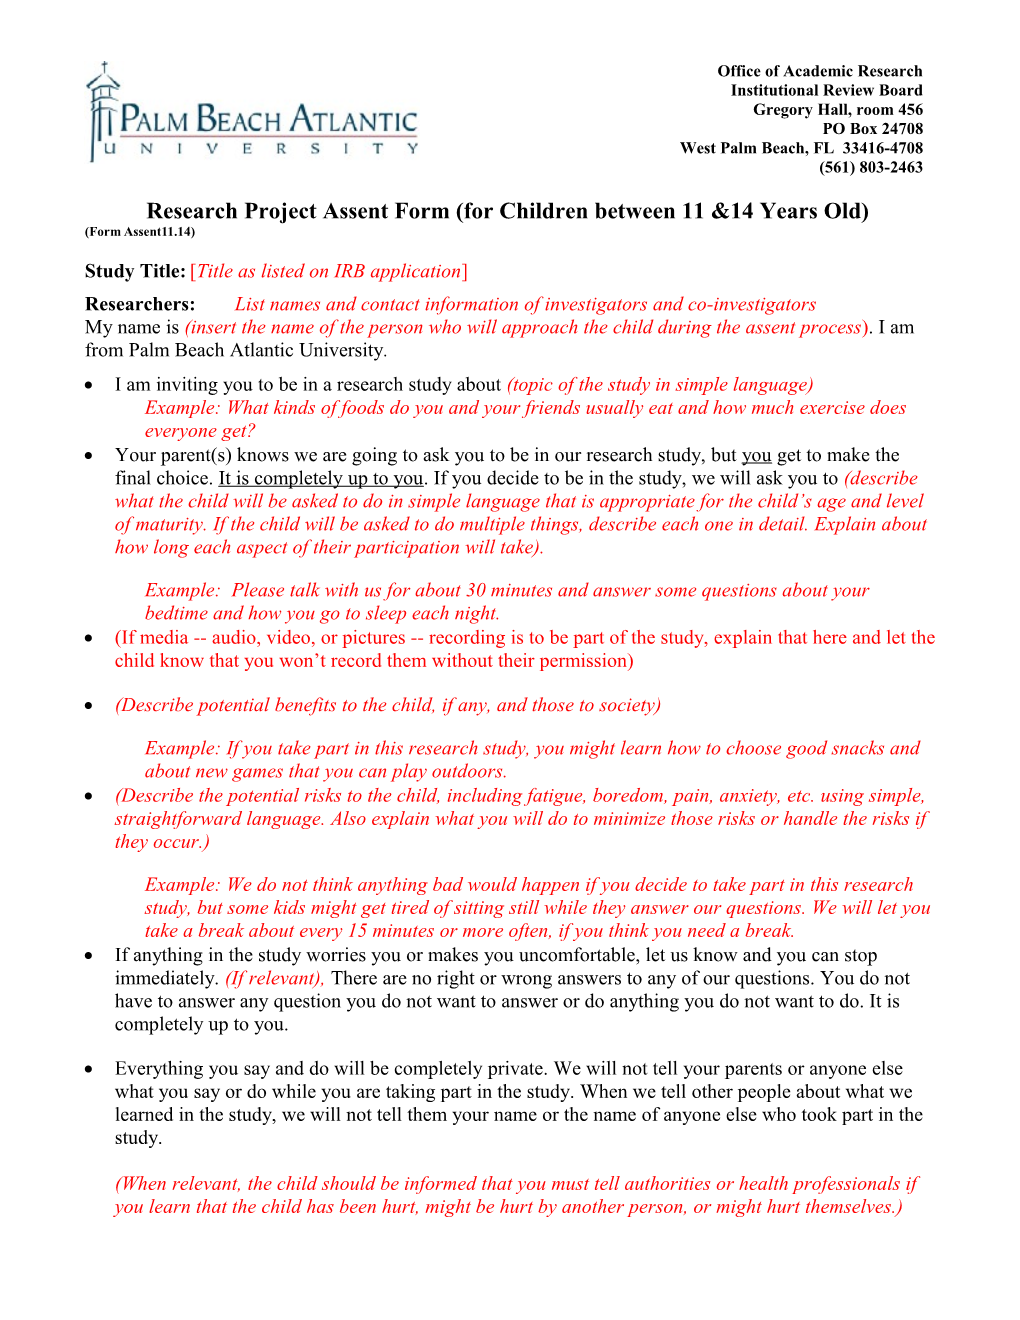 Research Project Assent Form (For Children Between 11 &14 Years Old)